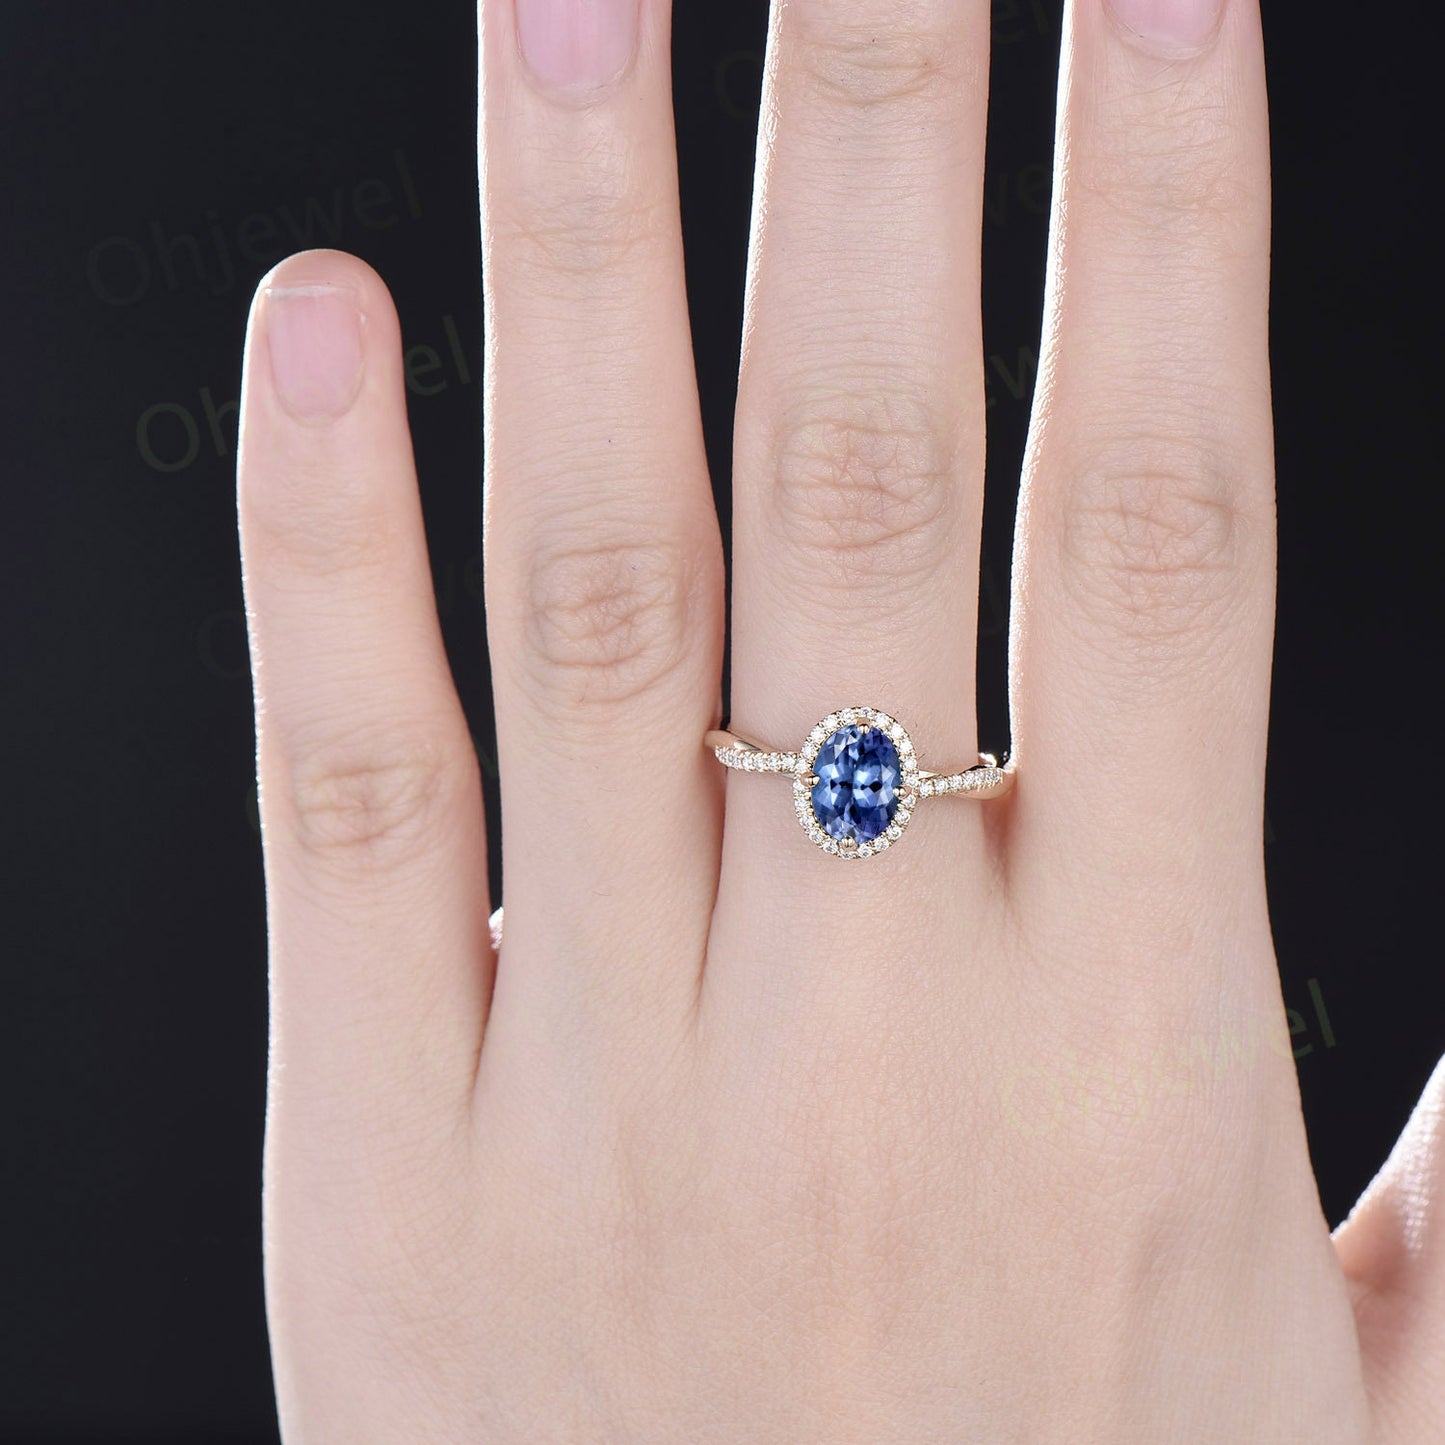 Oval natural Tanzanite ring vintage unique engagement ring halo twisted diamond ring prong set fine jewelry yellow gold bridal ring women